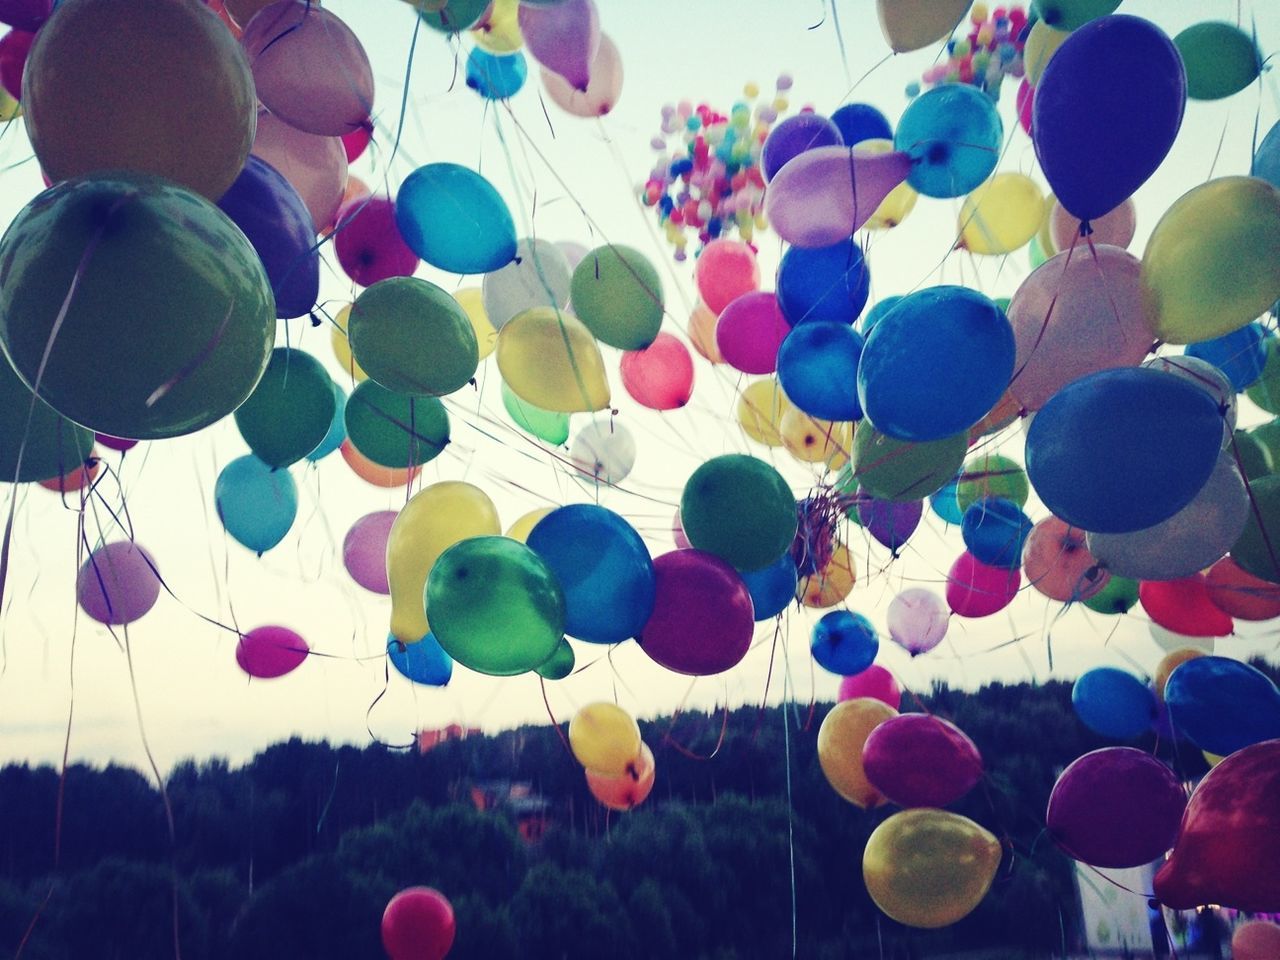 multi colored, balloon, low angle view, sky, celebration, in a row, hanging, variation, abundance, decoration, hot air balloon, colorful, large group of objects, lighting equipment, blue, mid-air, no people, outdoors, sphere, nature